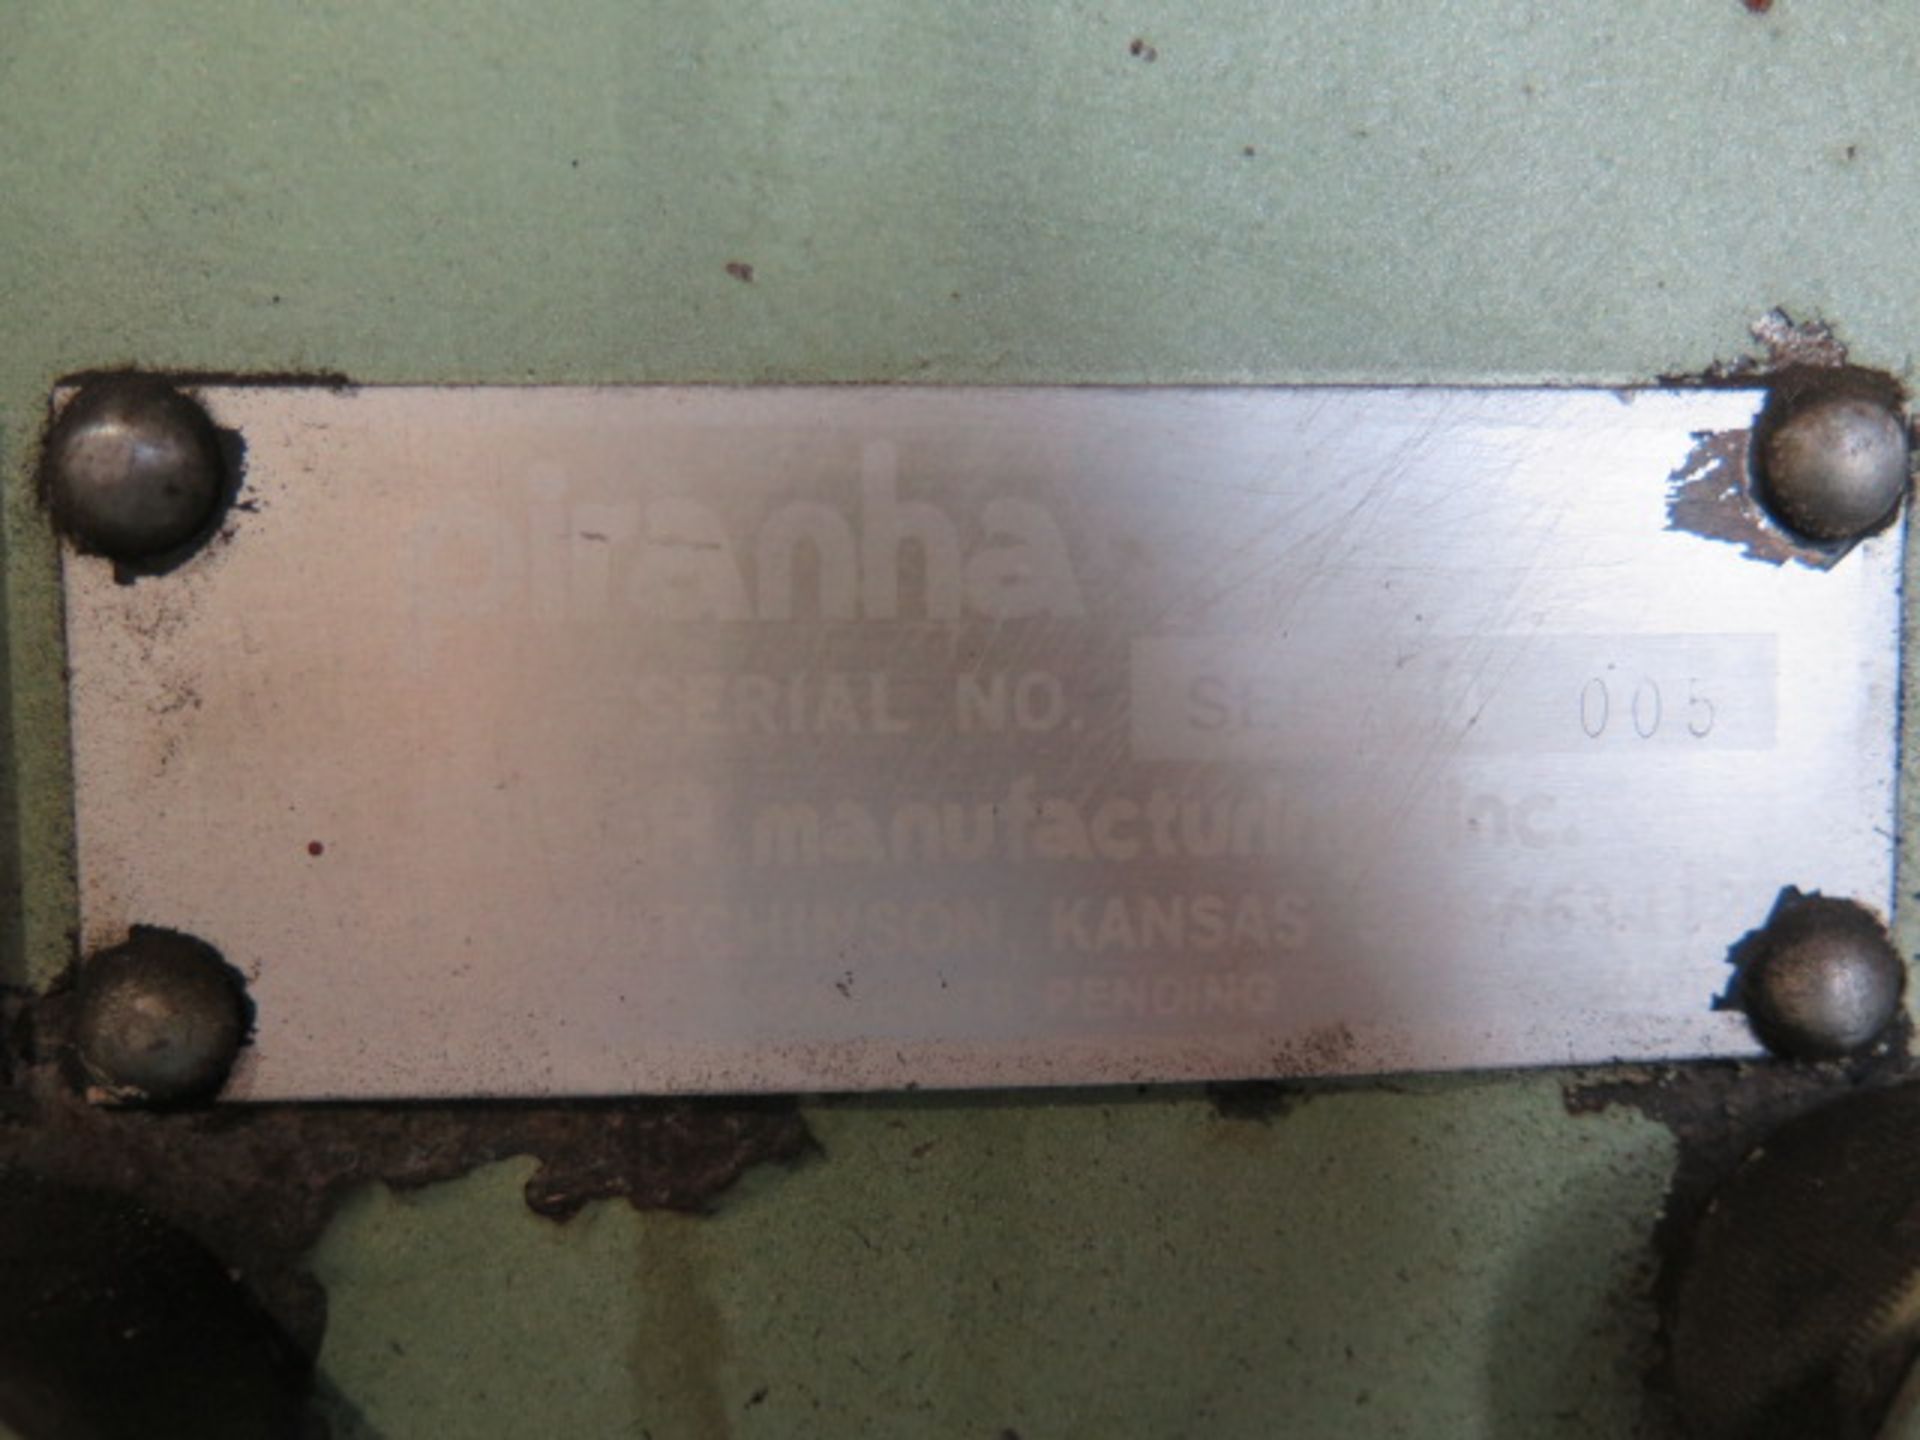 Piranha SEP-140 140 Ton Hydraulic Punch Press s/n SEP140-005 w/ 1 ¾” thru 1”, SOLD AS IS - Image 15 of 15